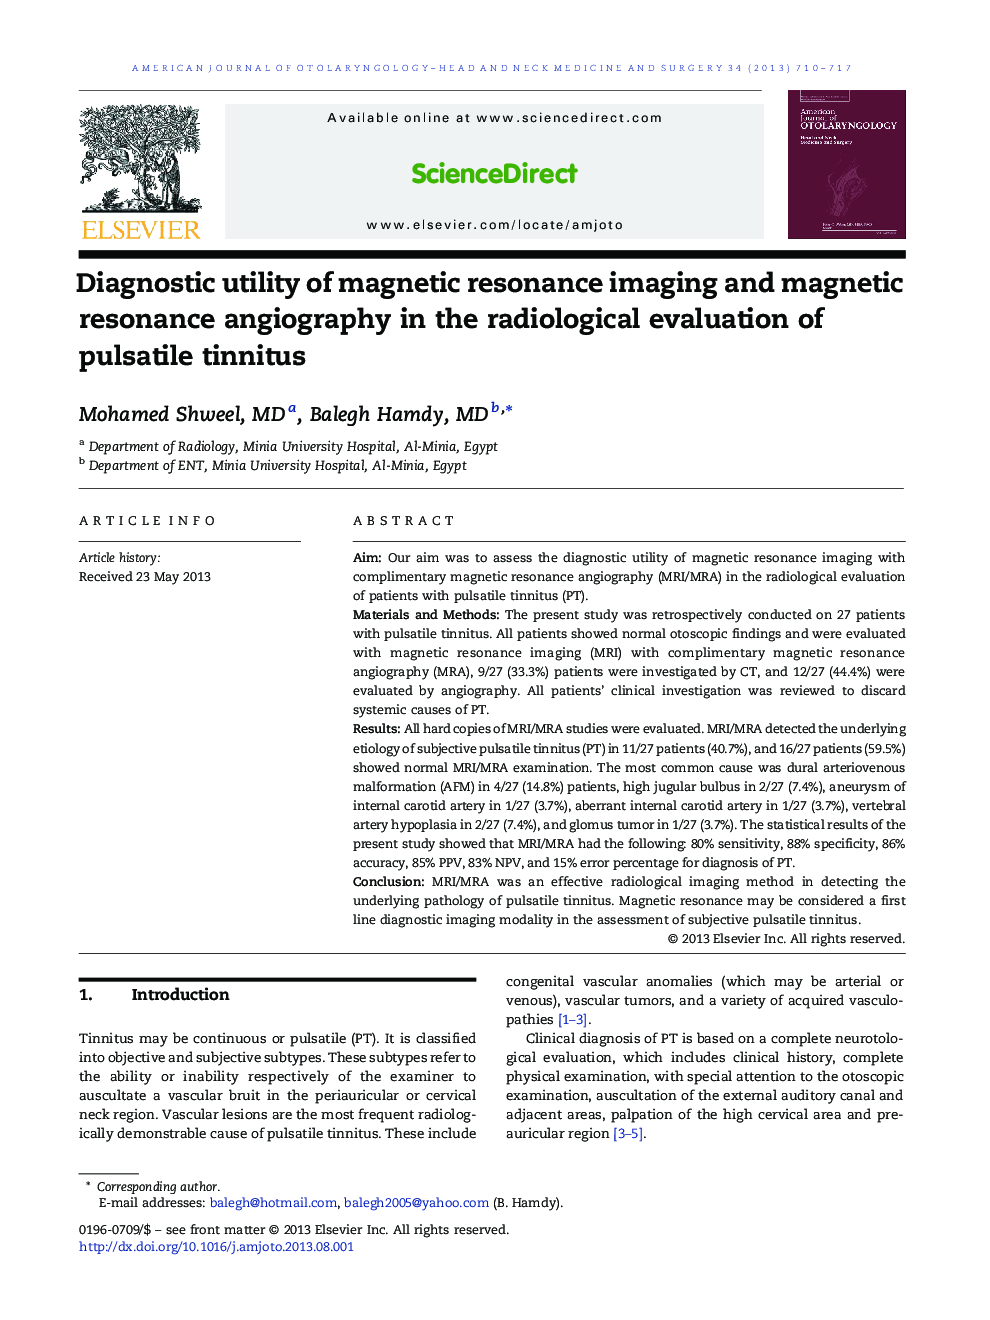 Diagnostic utility of magnetic resonance imaging and magnetic resonance angiography in the radiological evaluation of pulsatile tinnitus